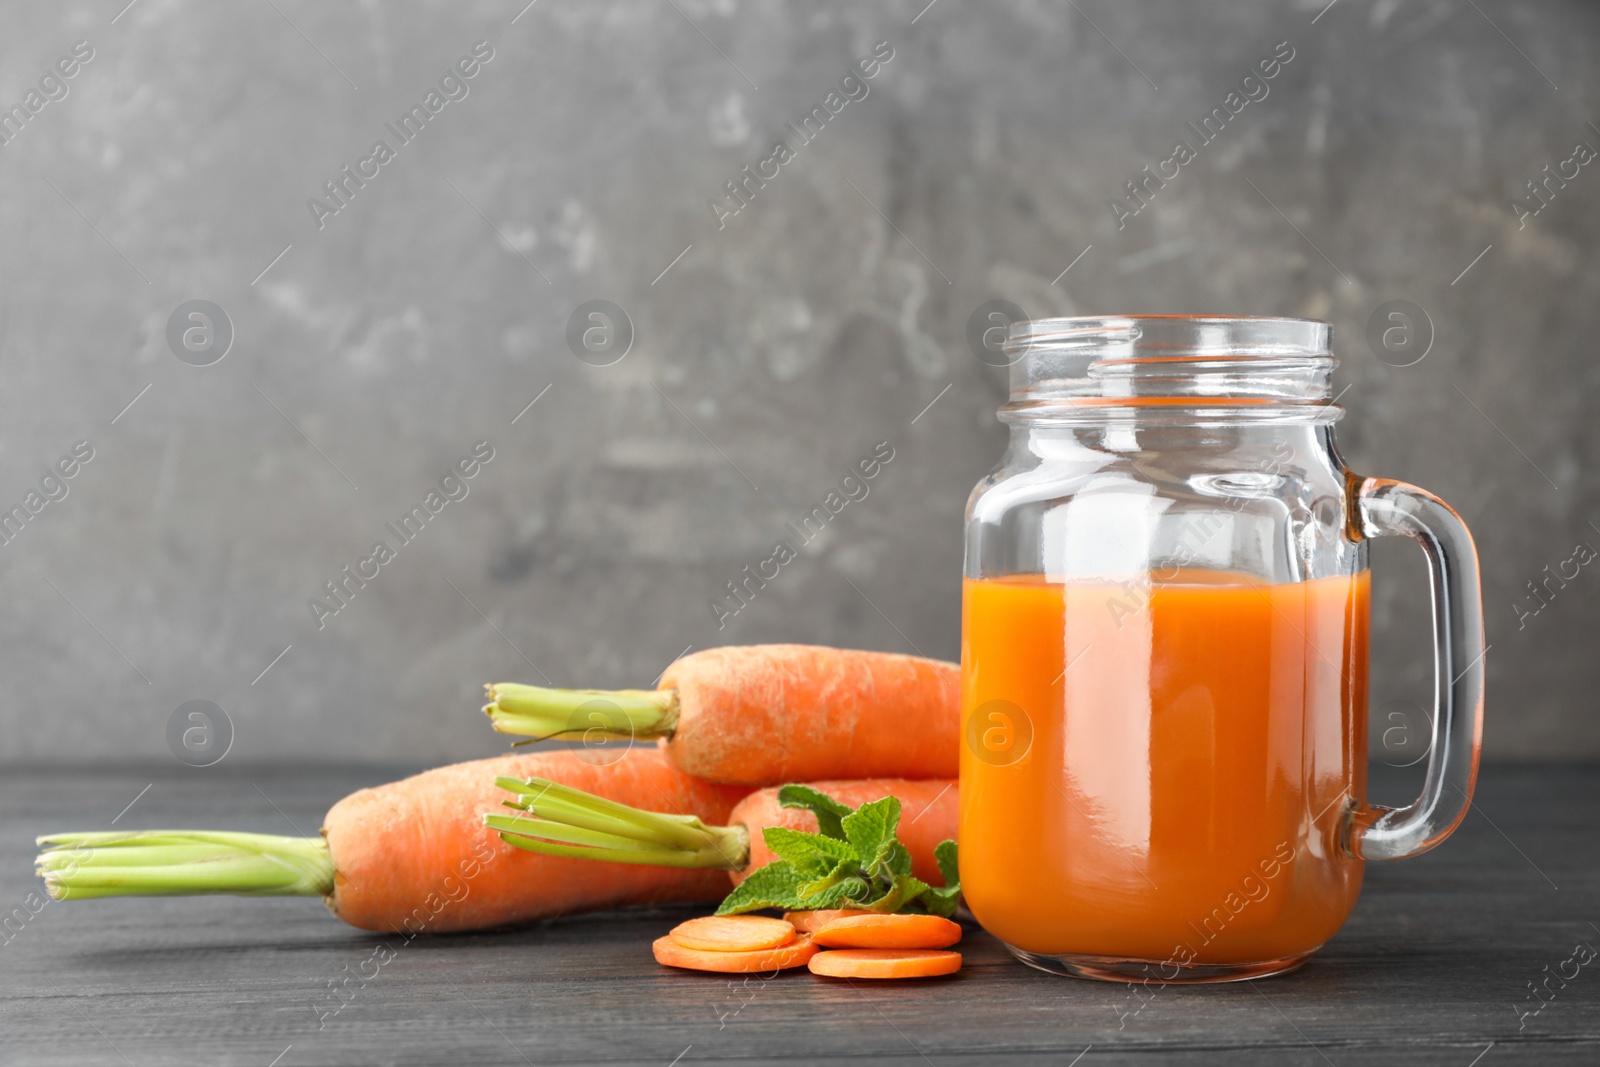 Photo of Mason jar of tasty drink and carrots on wooden table against color background, space for text